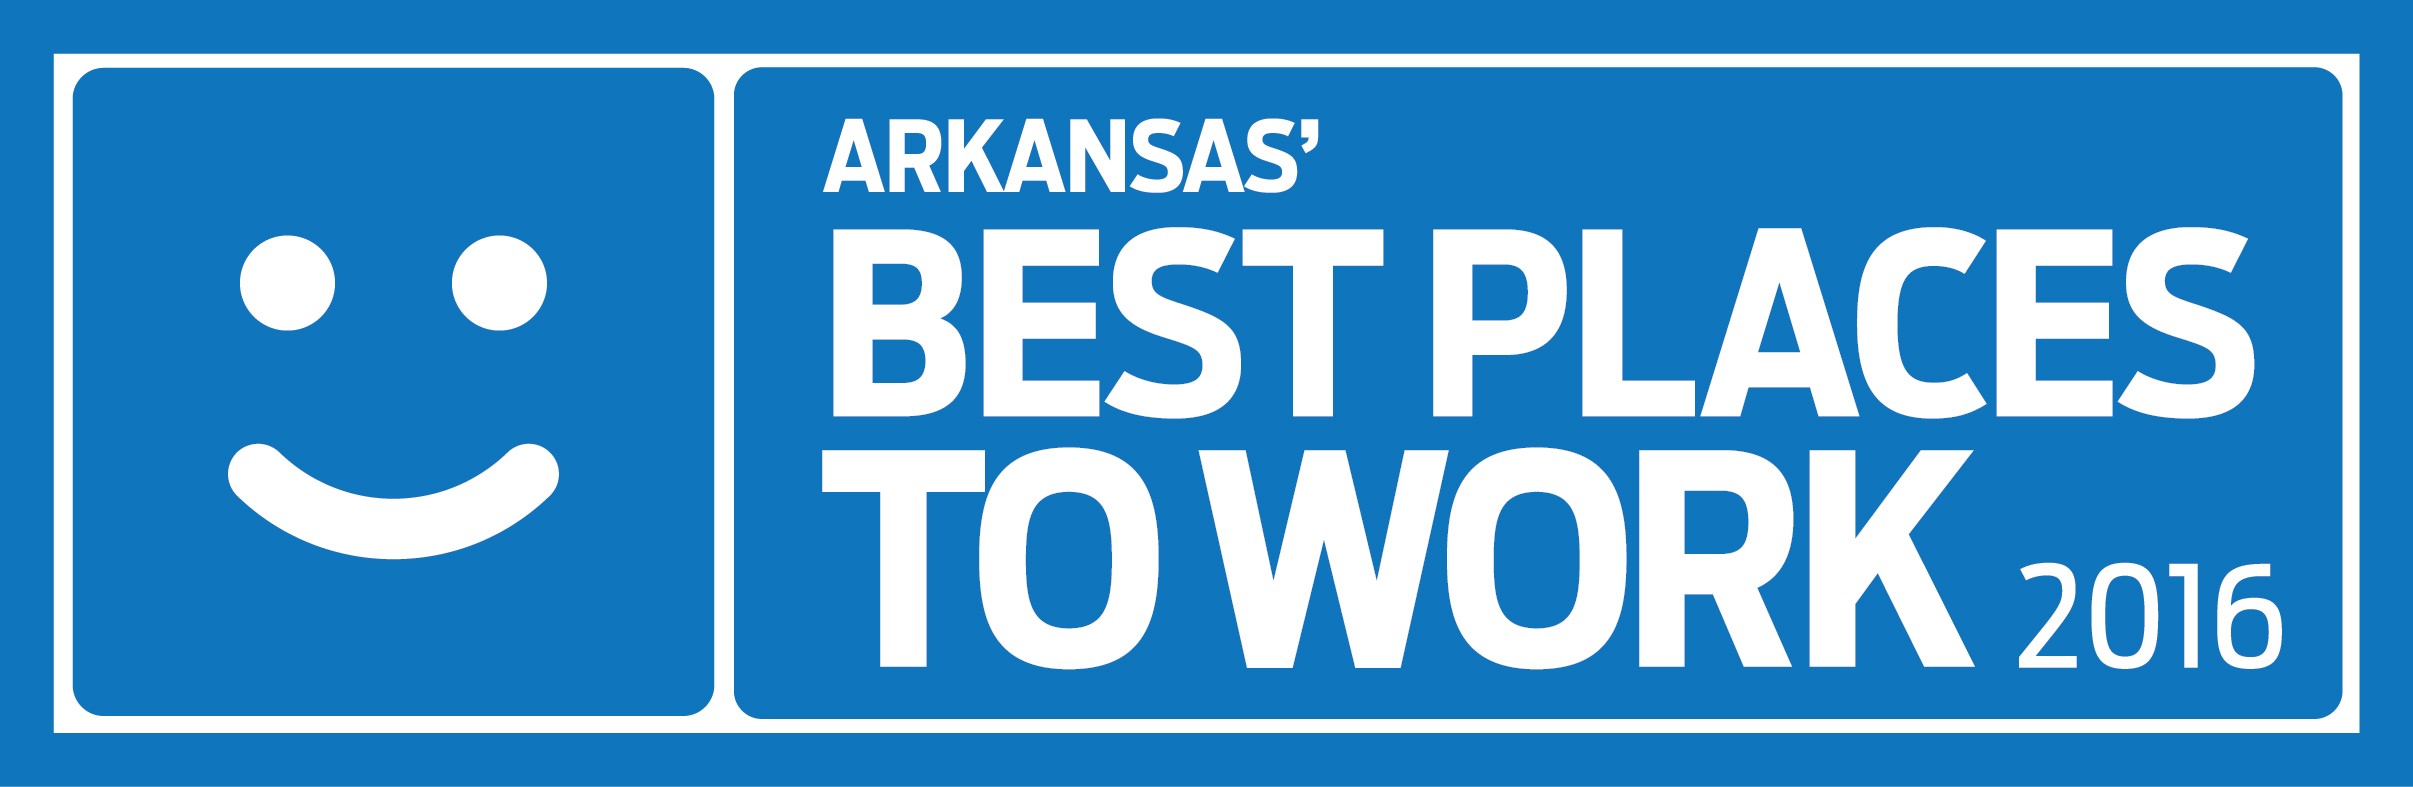 Delta Plastics Is One of Arkansas' Best Places to Work